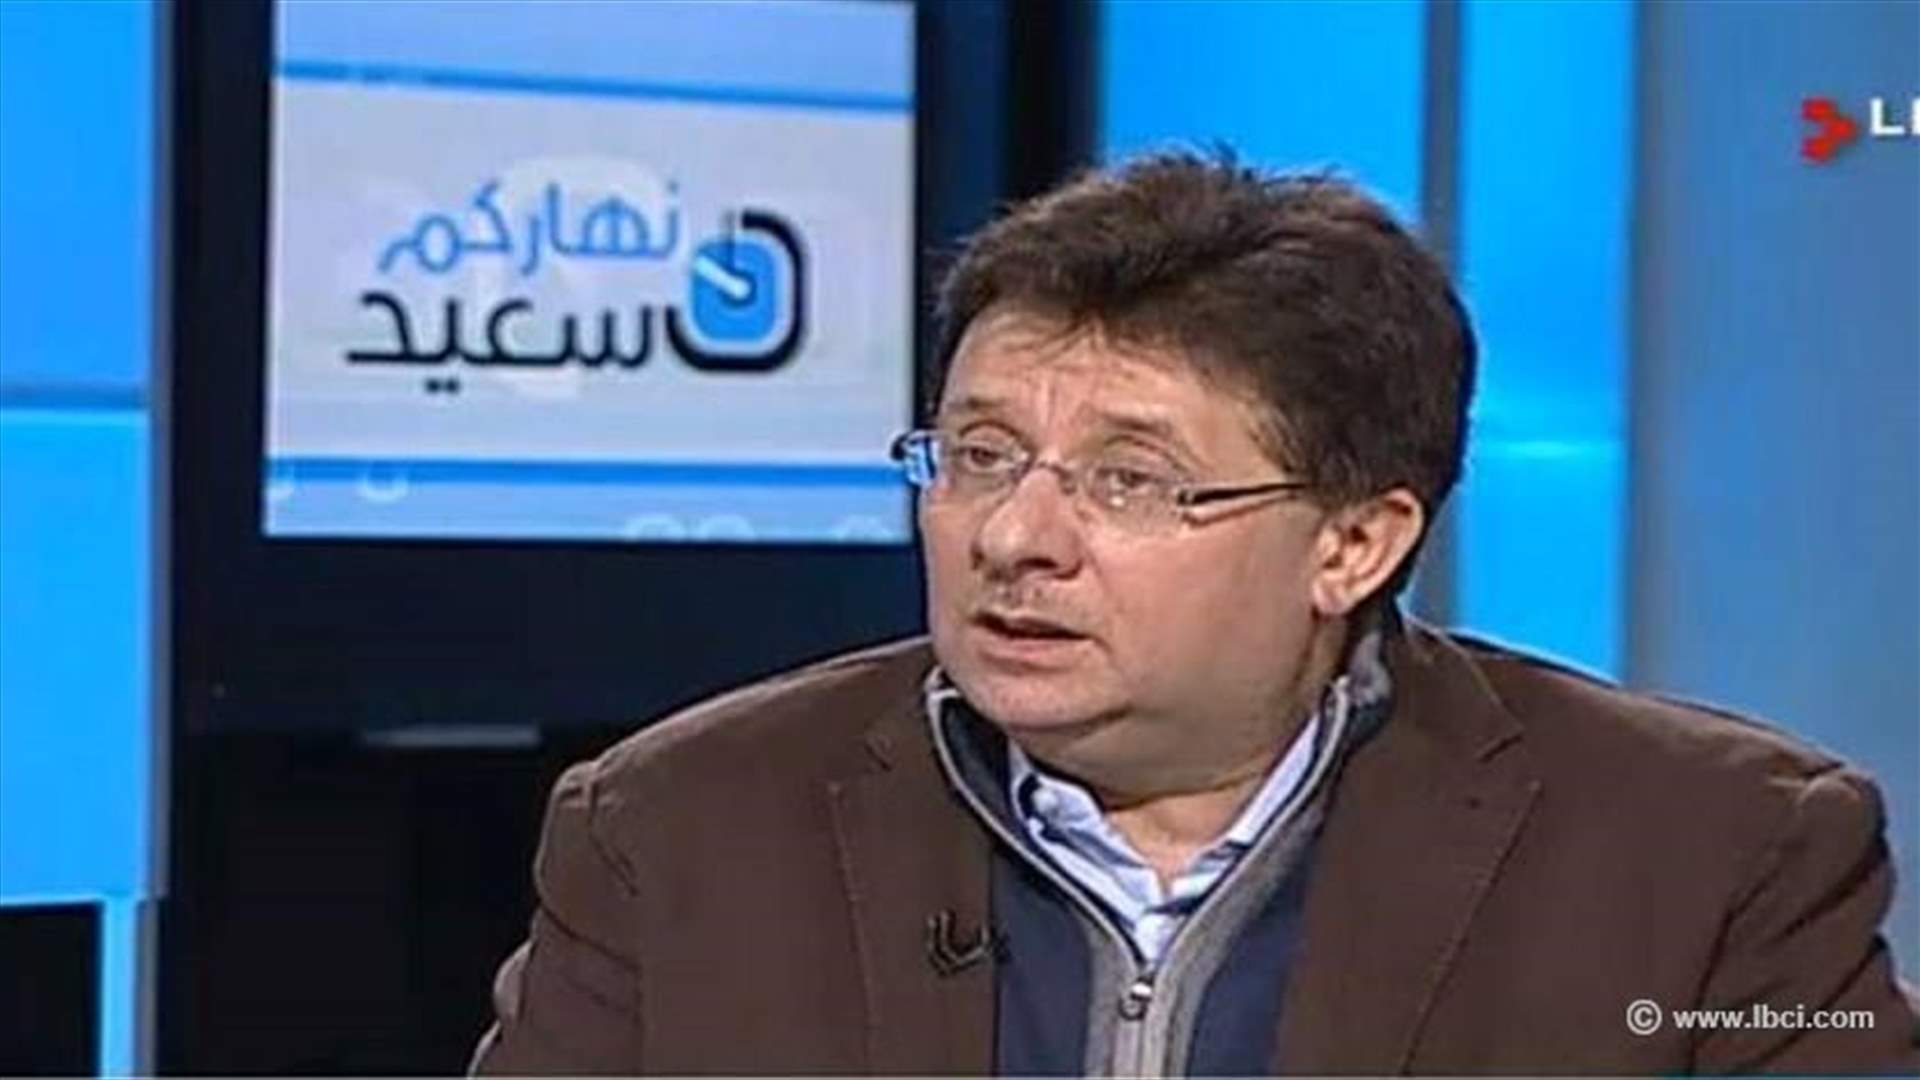 Kanaan to LBCI: Our agreement with LF is neither a March 8 nor 14 project